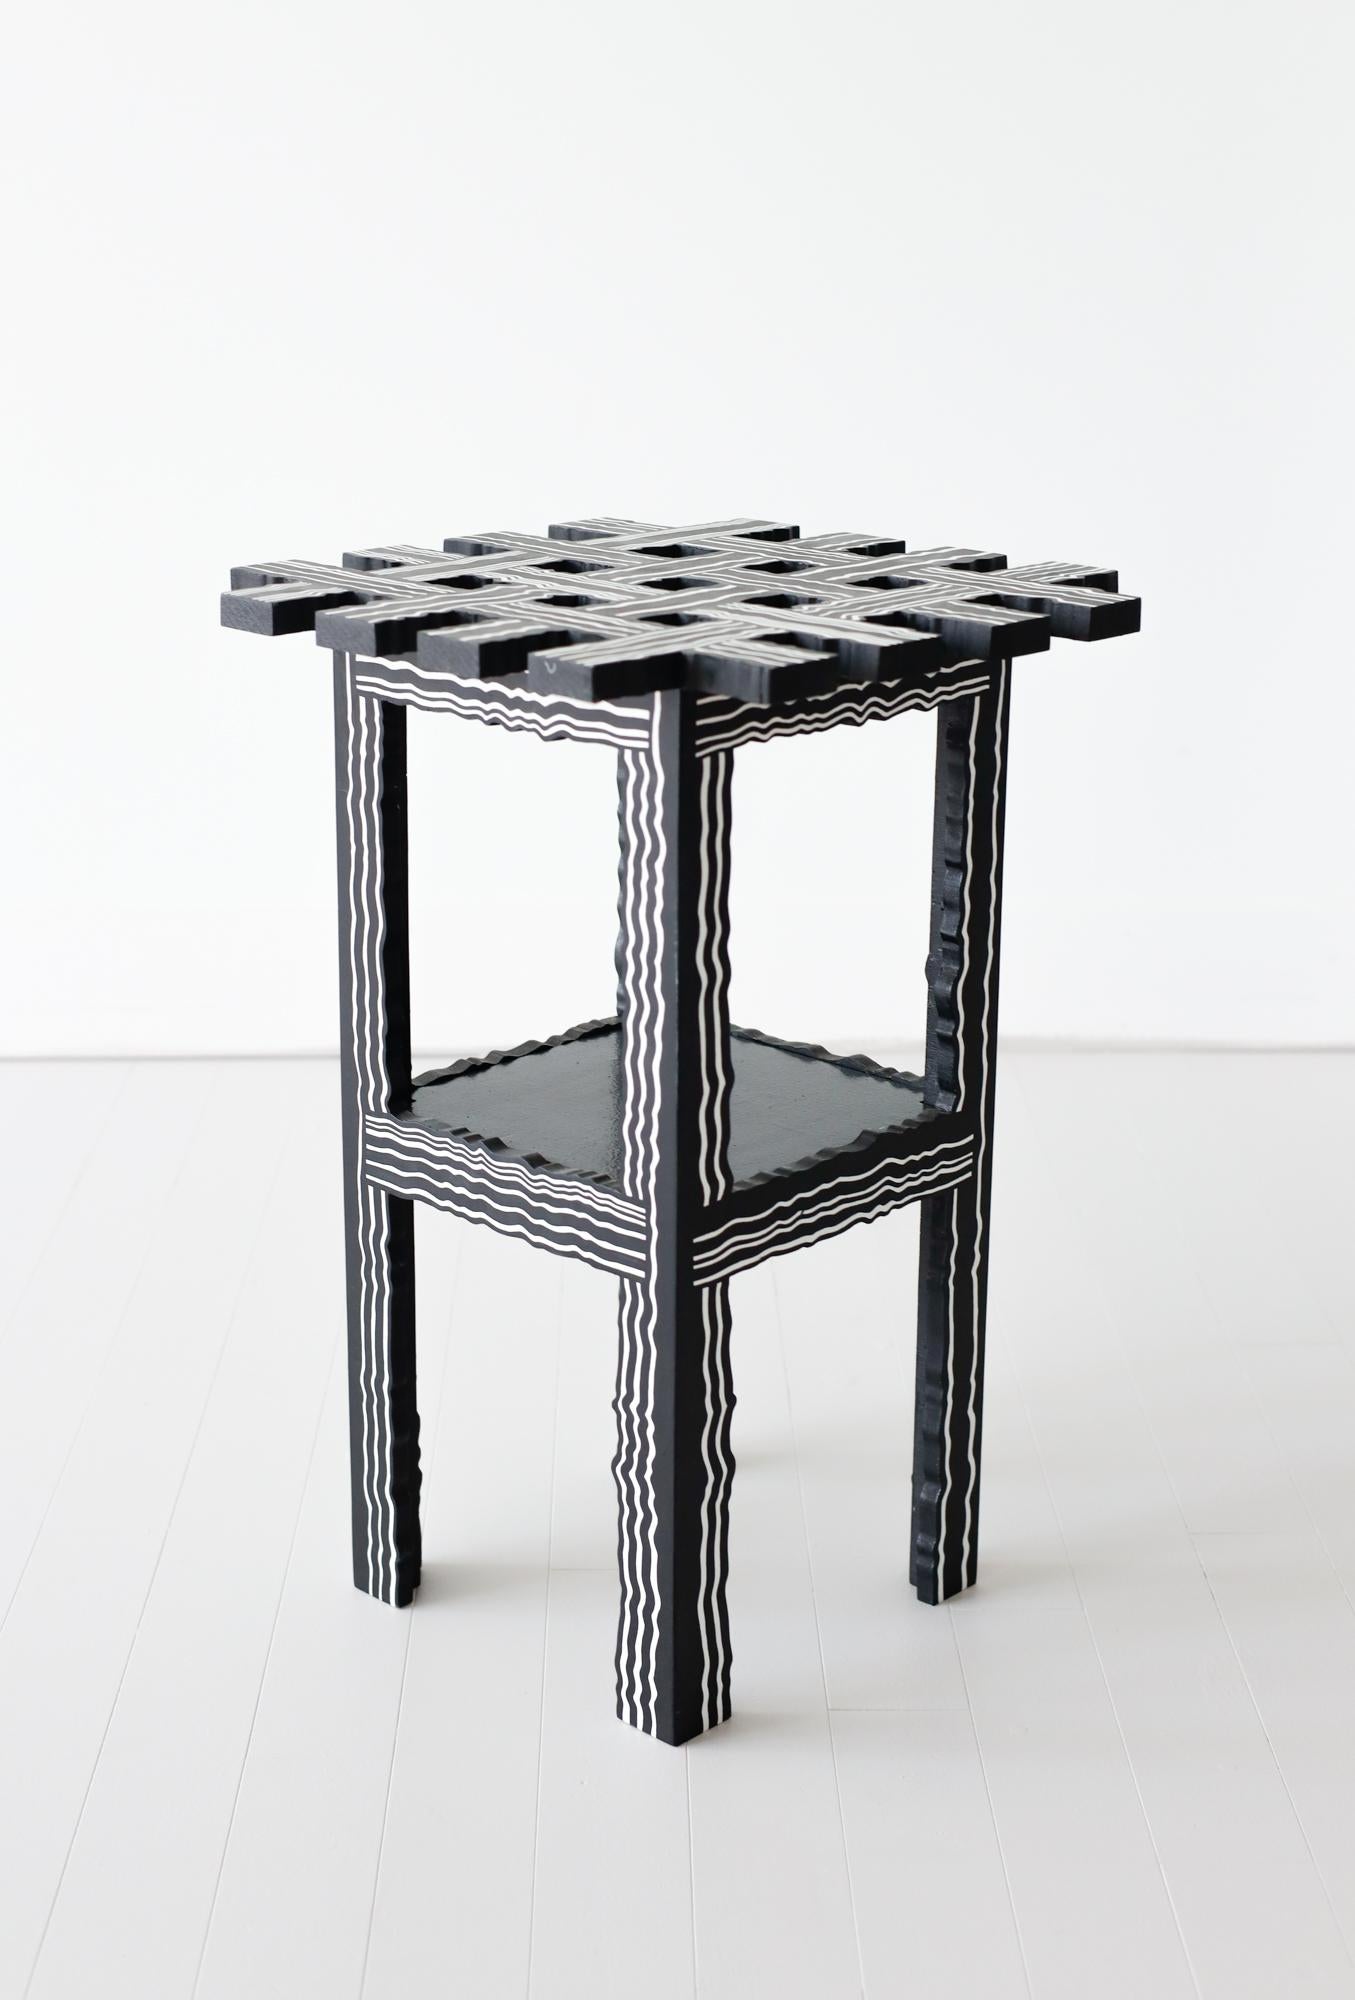 Jason Andrew Turner Abstract Sculpture - Grid Table